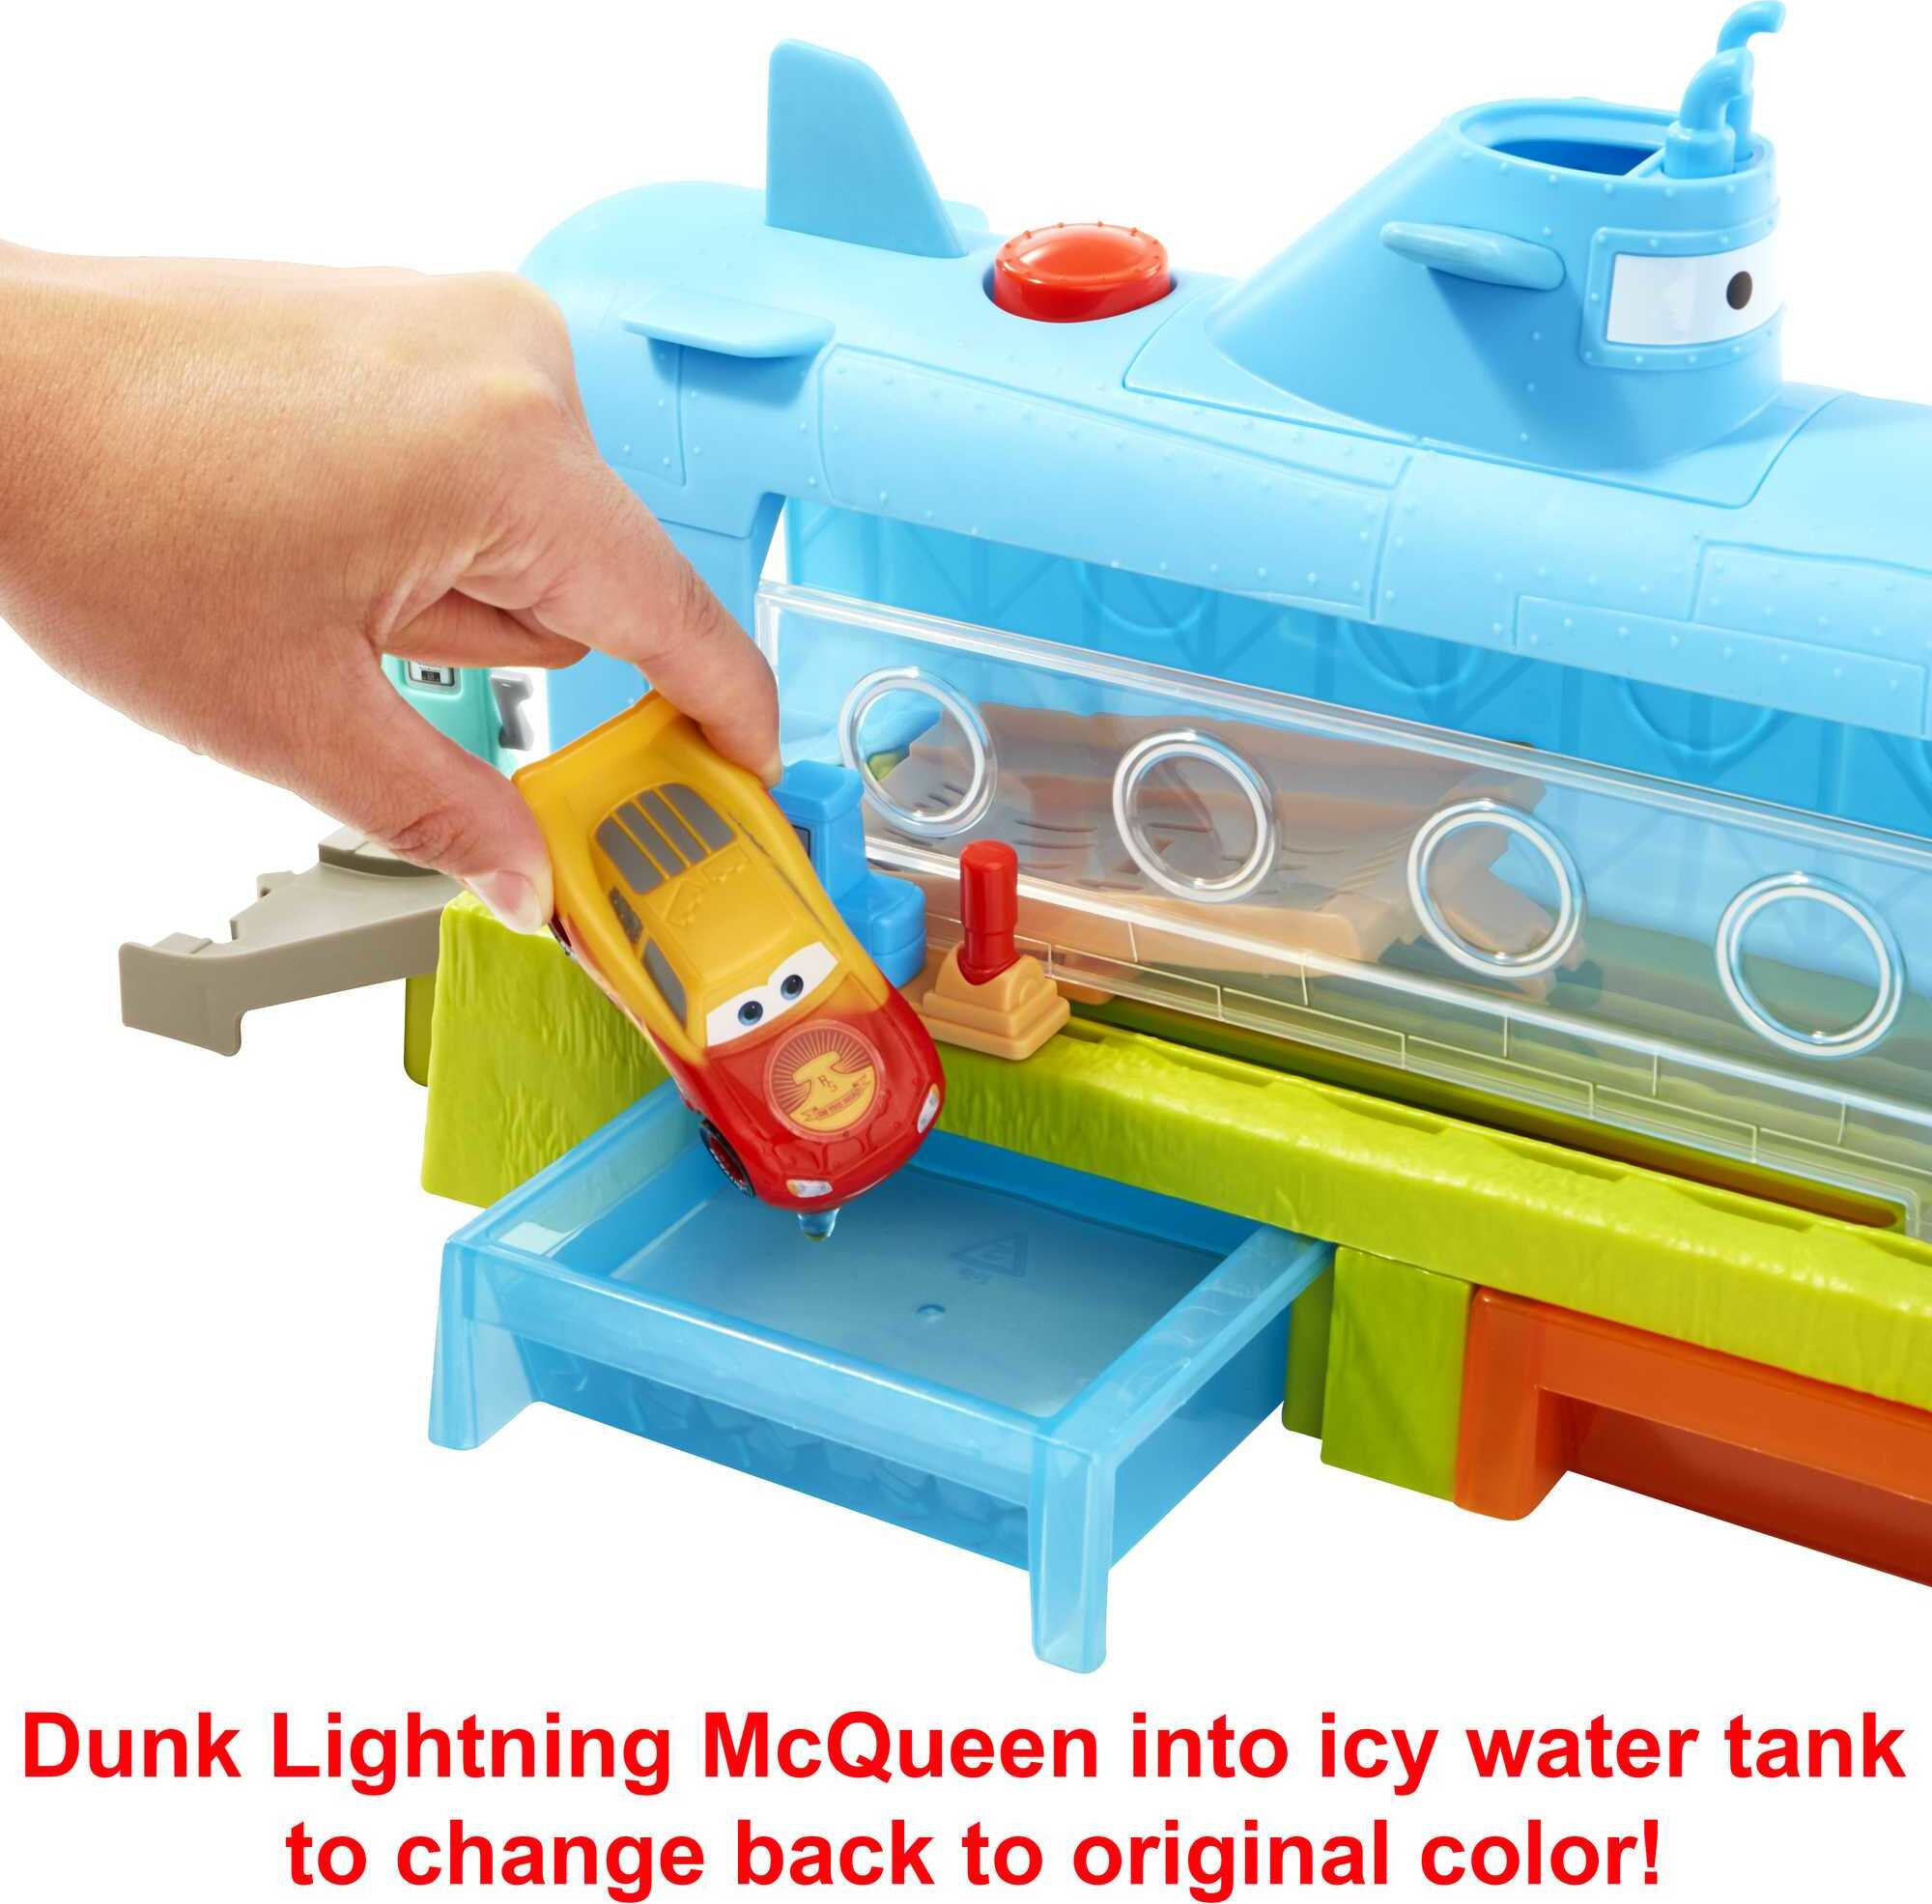 Disney Pixar Cars Submarine Car Wash Playset with Color-Change Lightning McQueen Toy Car - image 4 of 7